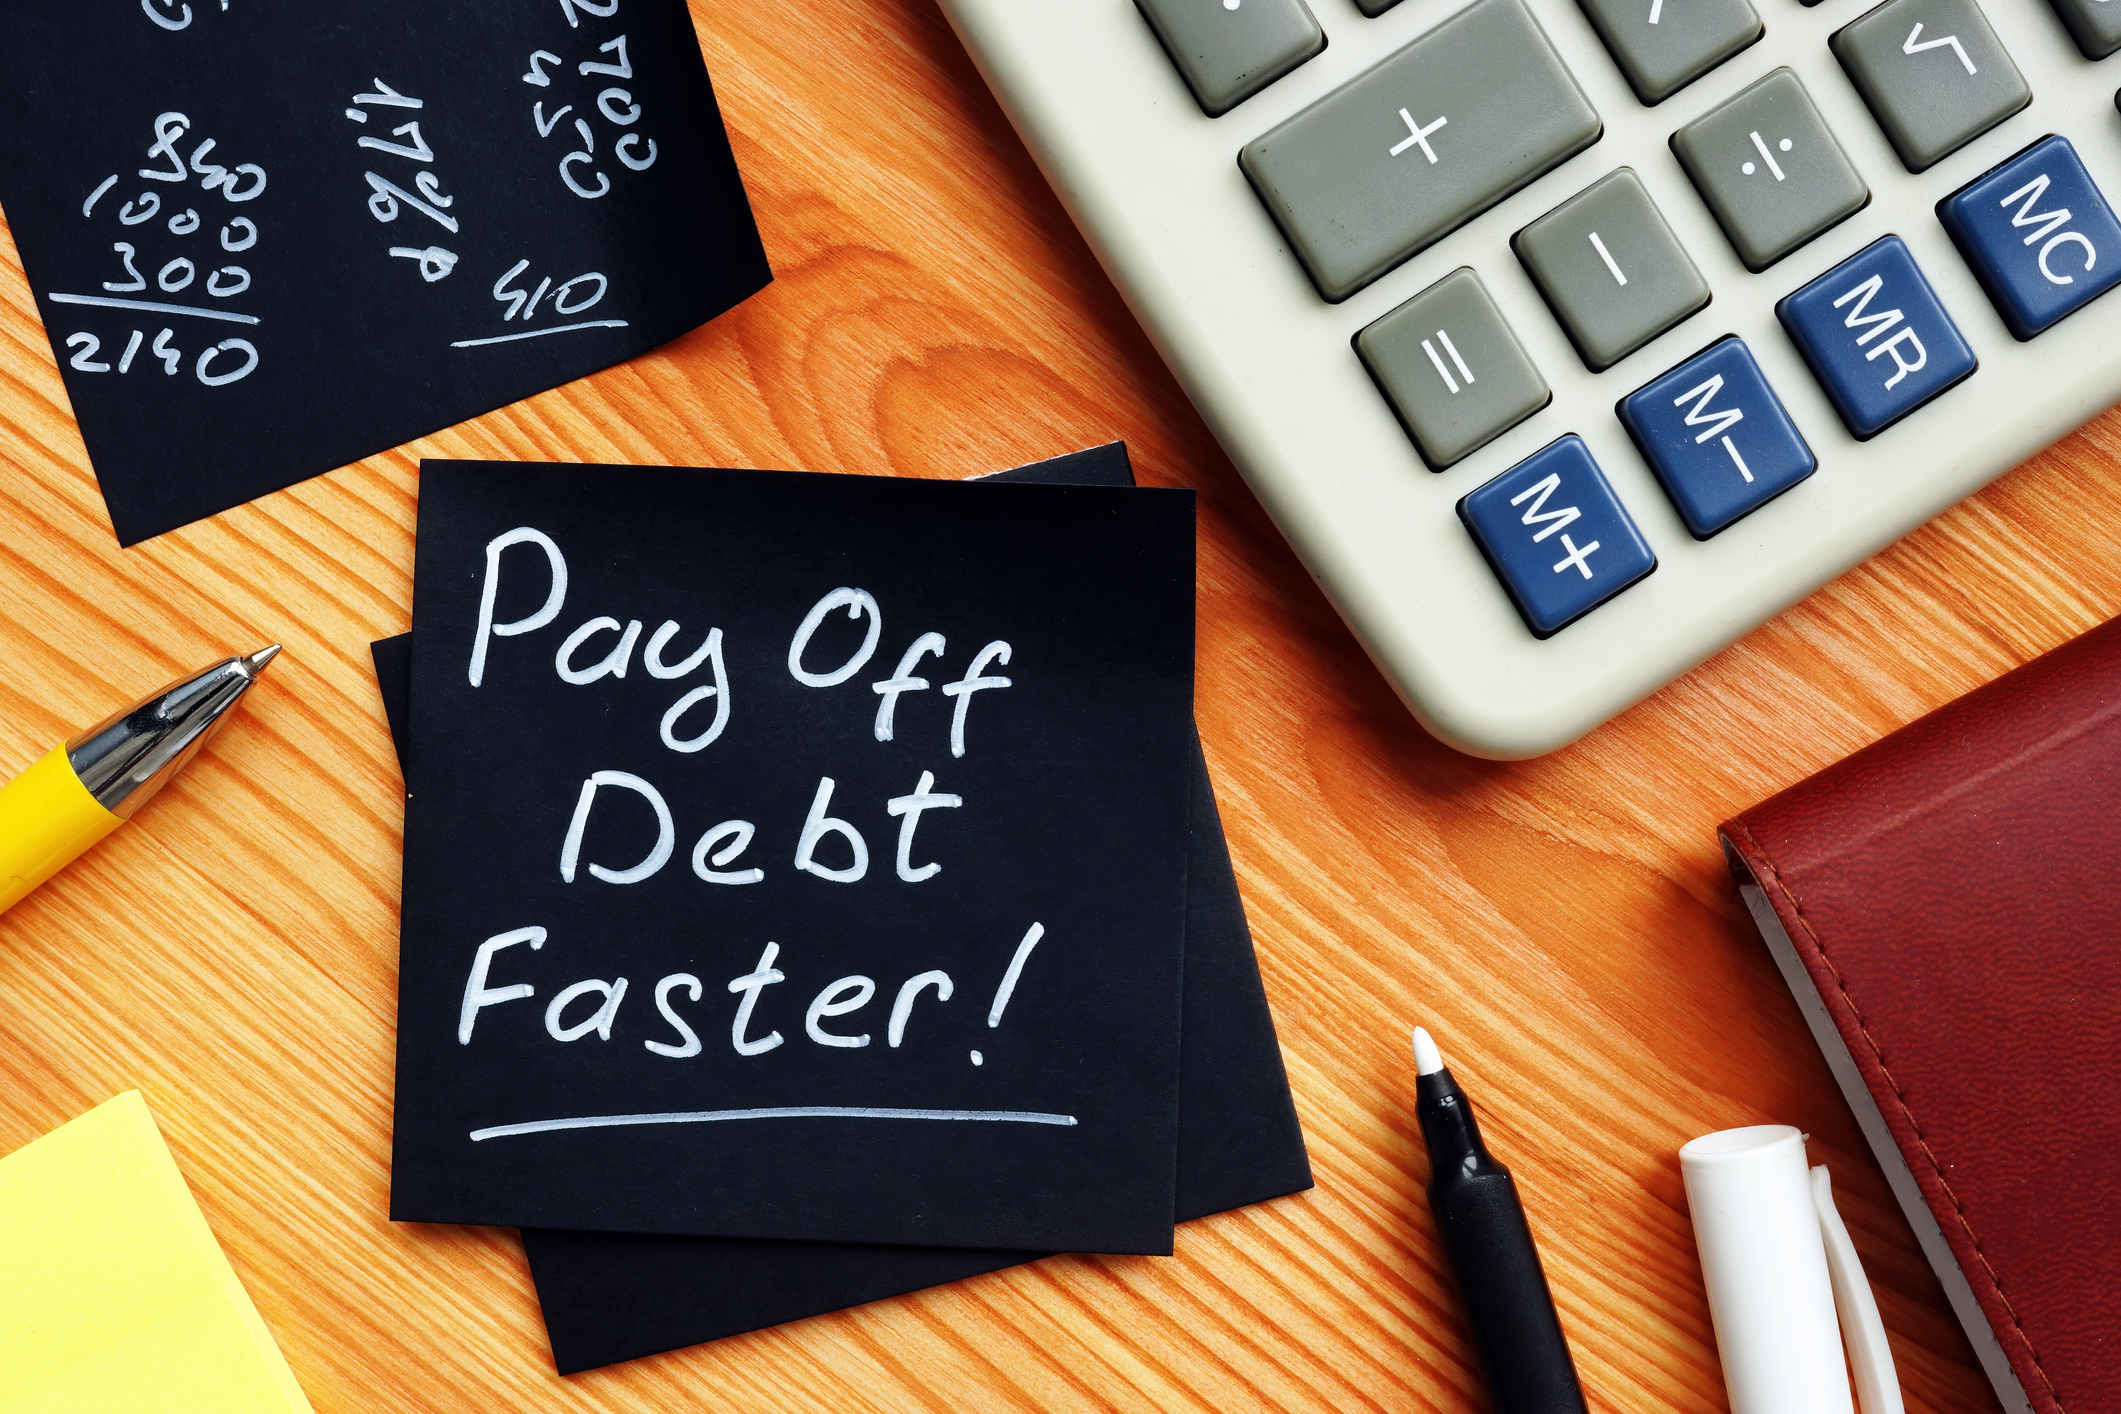 Pay Off Debt Faster - Complete Controller